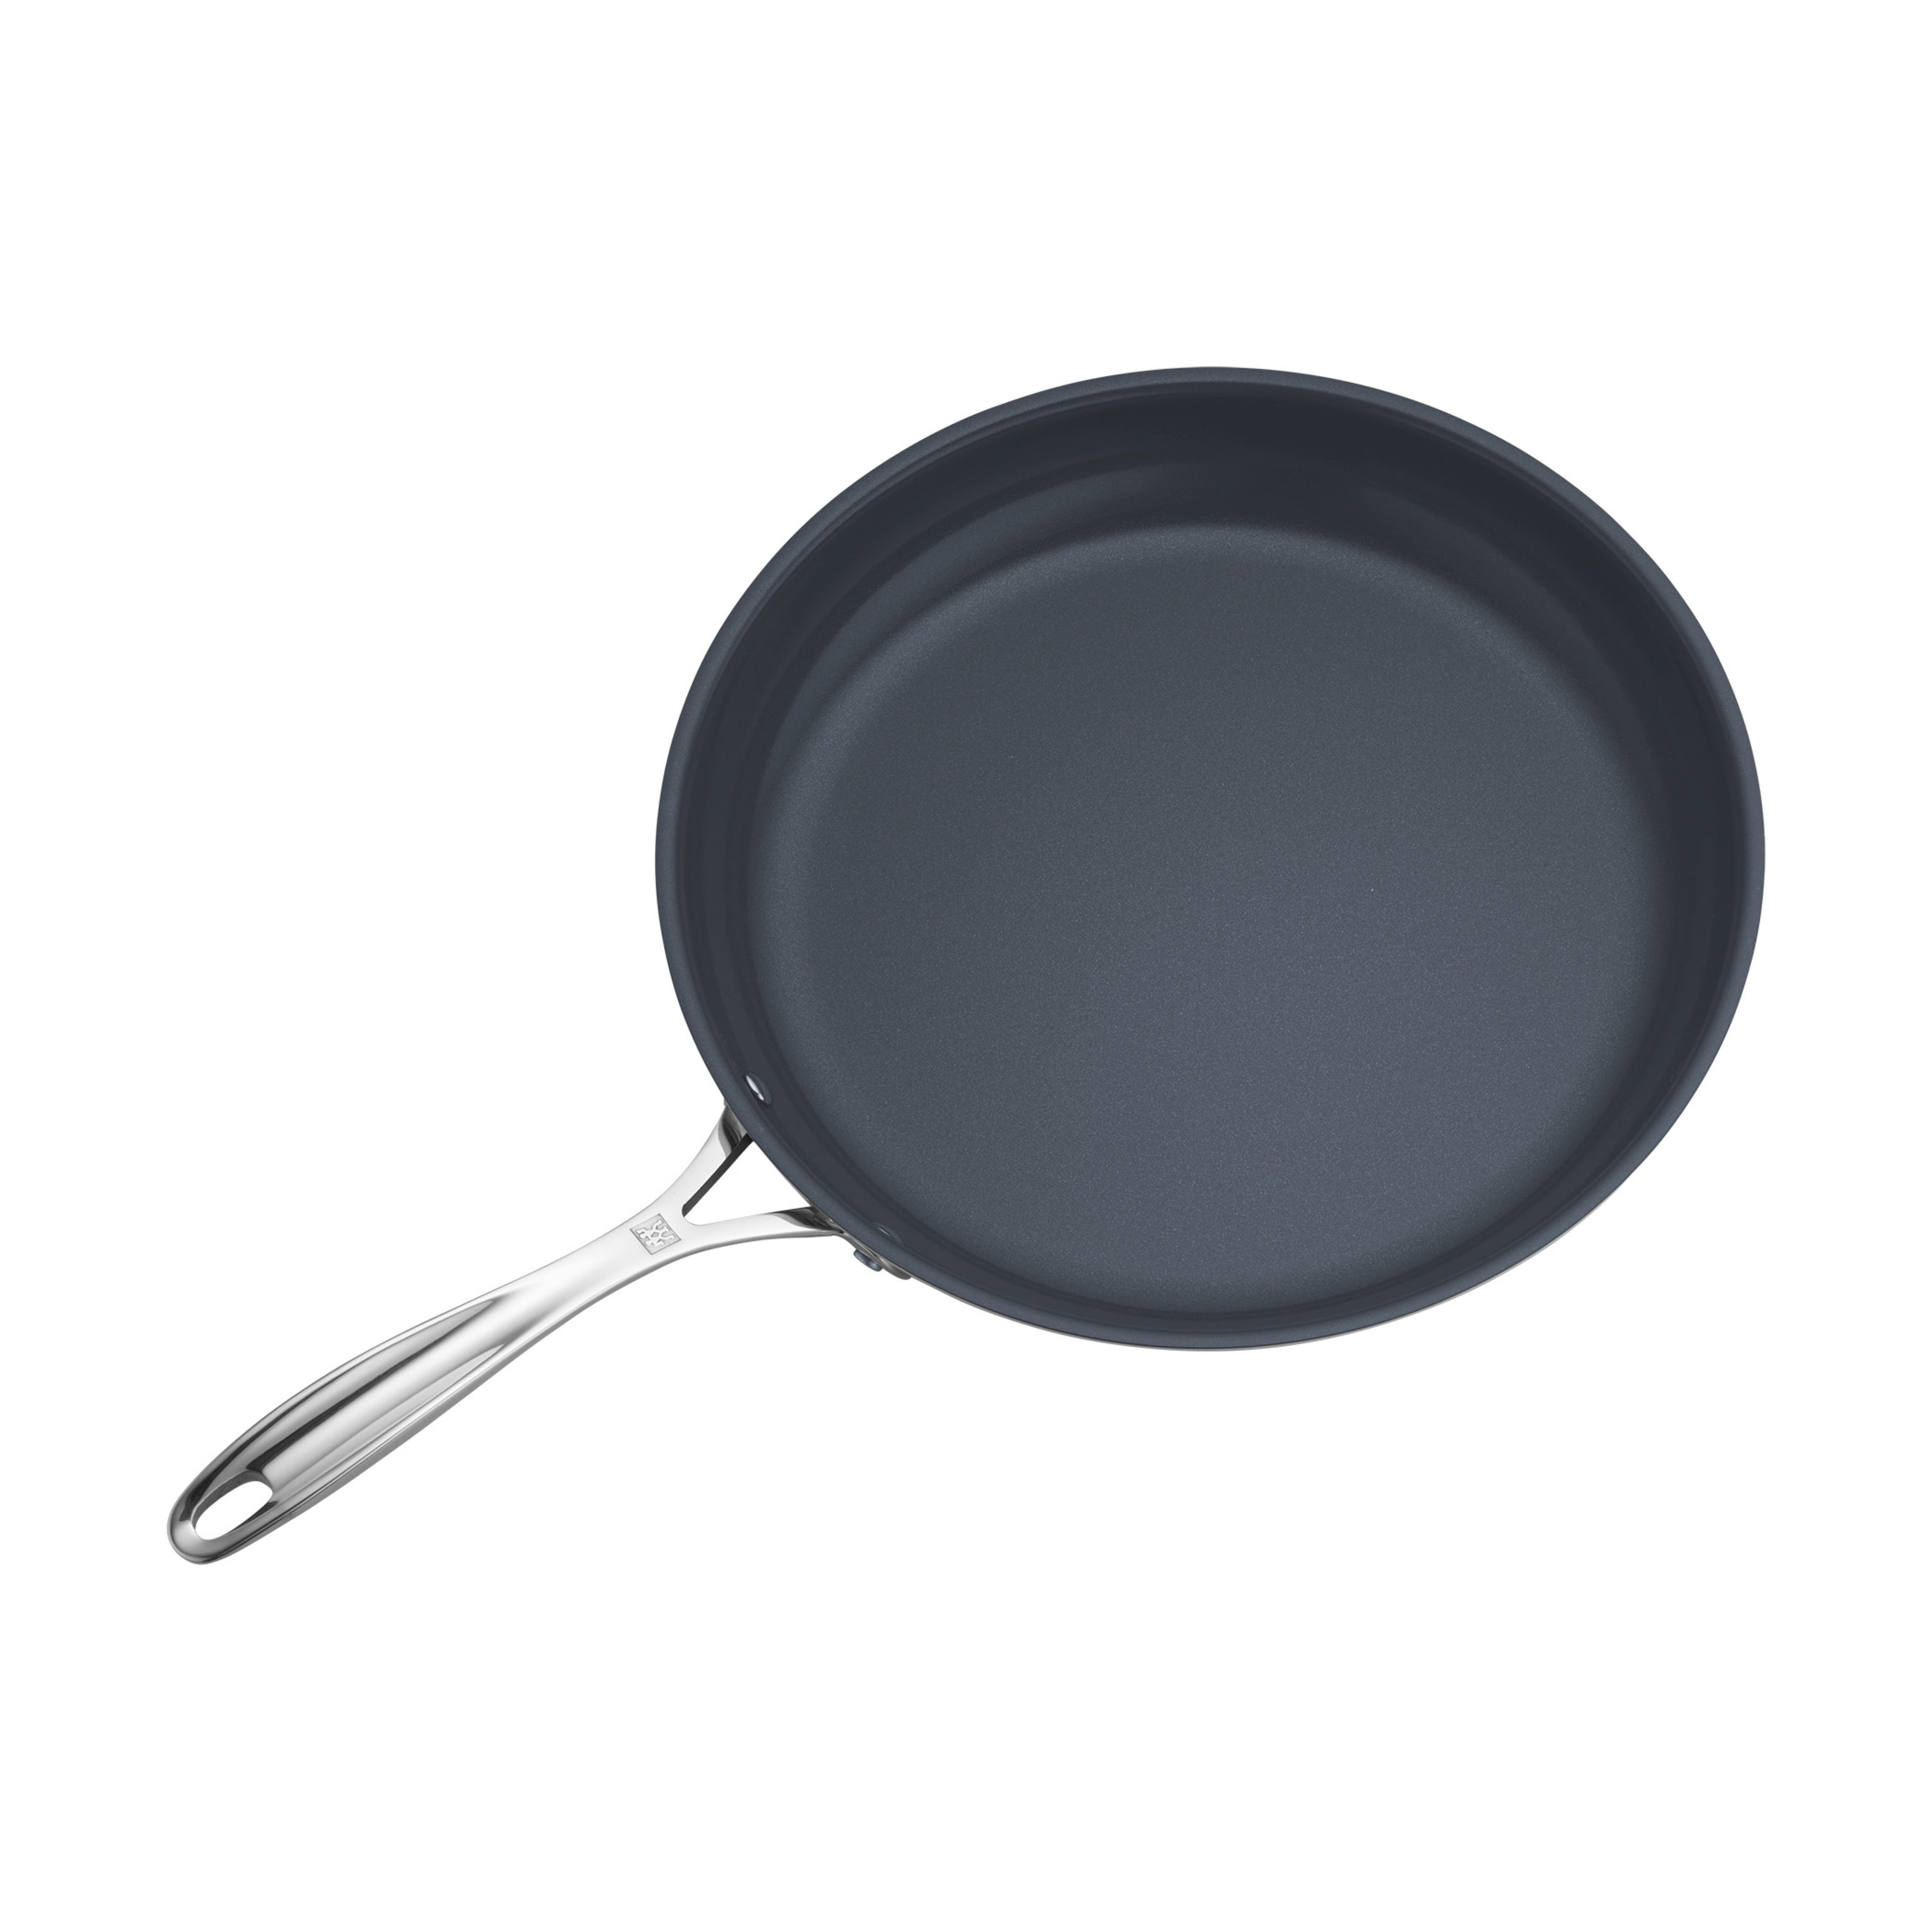 Zwilling Vitality frying pan from Zwilling